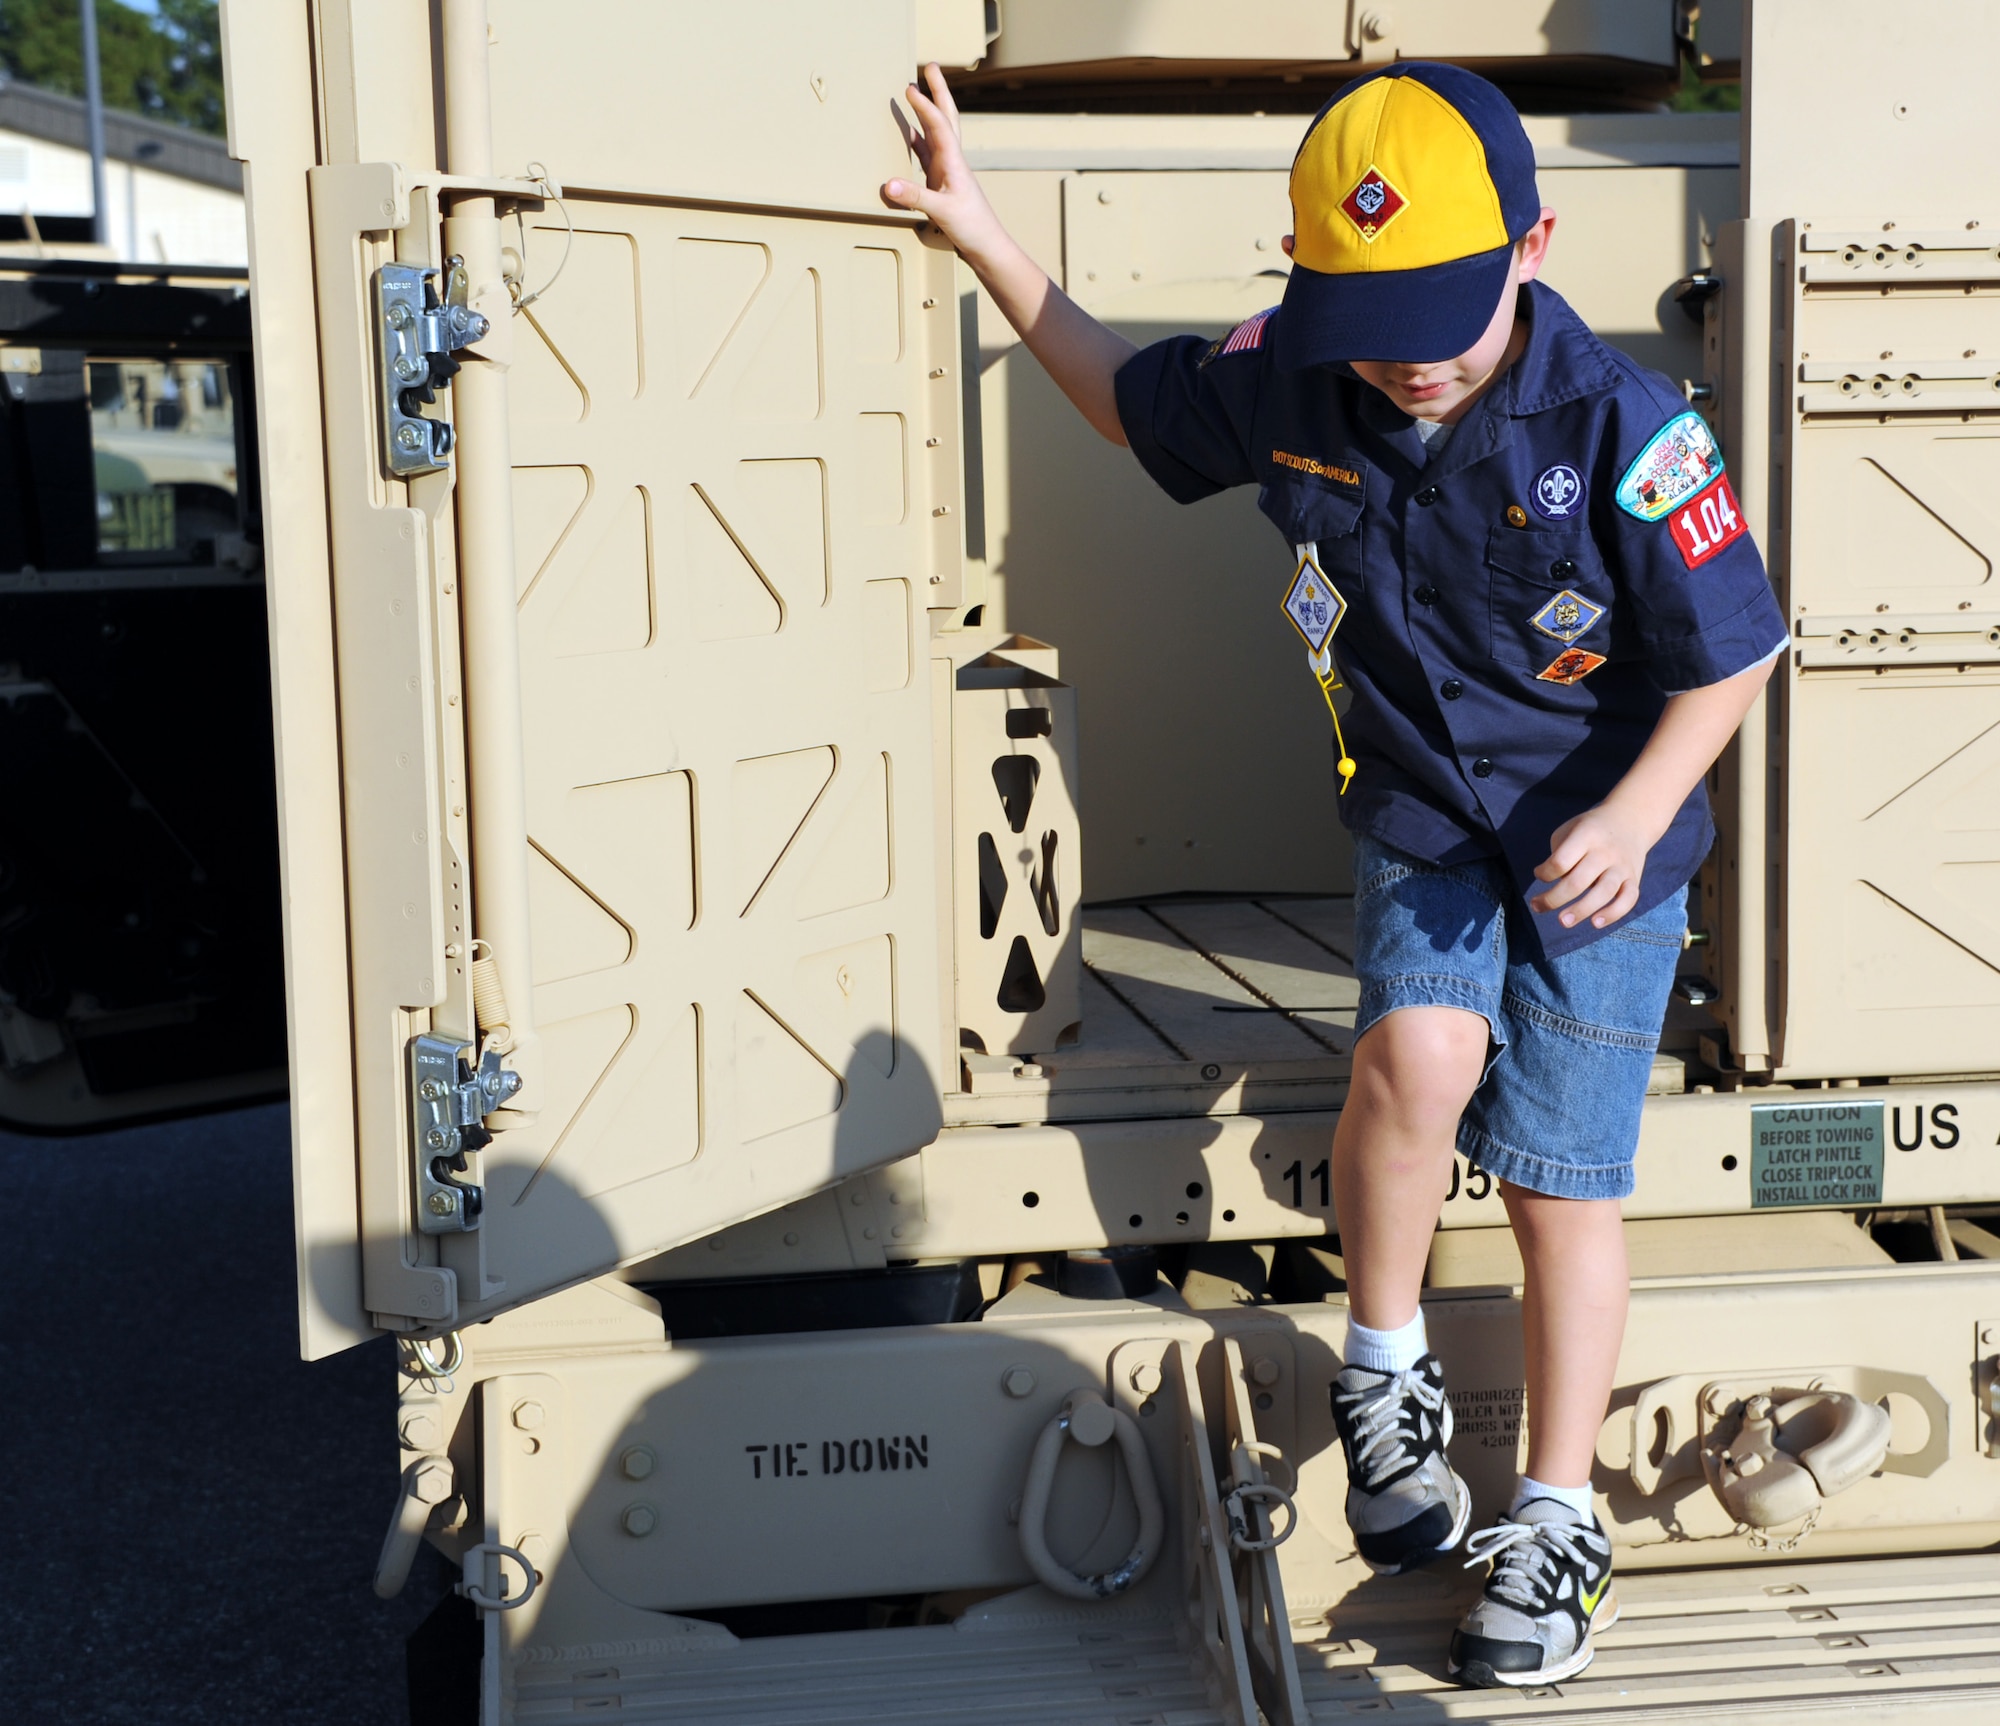 Boy Scout Andrew Polasky explores a Humvee during Cub Scout Pack 104's visit to Hurlburt Field, Fla., Jan. 24, 2013. Six Boy Scouts of America donated $760 worth of popcorn to Airmen on behalf of Pack 104 of Navarre, Fla.The Scouts were given the opportunity to explore a Humvee and witness combat controllers rappel as a token of appreciation. (U.S. Air Force photo/Rachel Arroyo)

